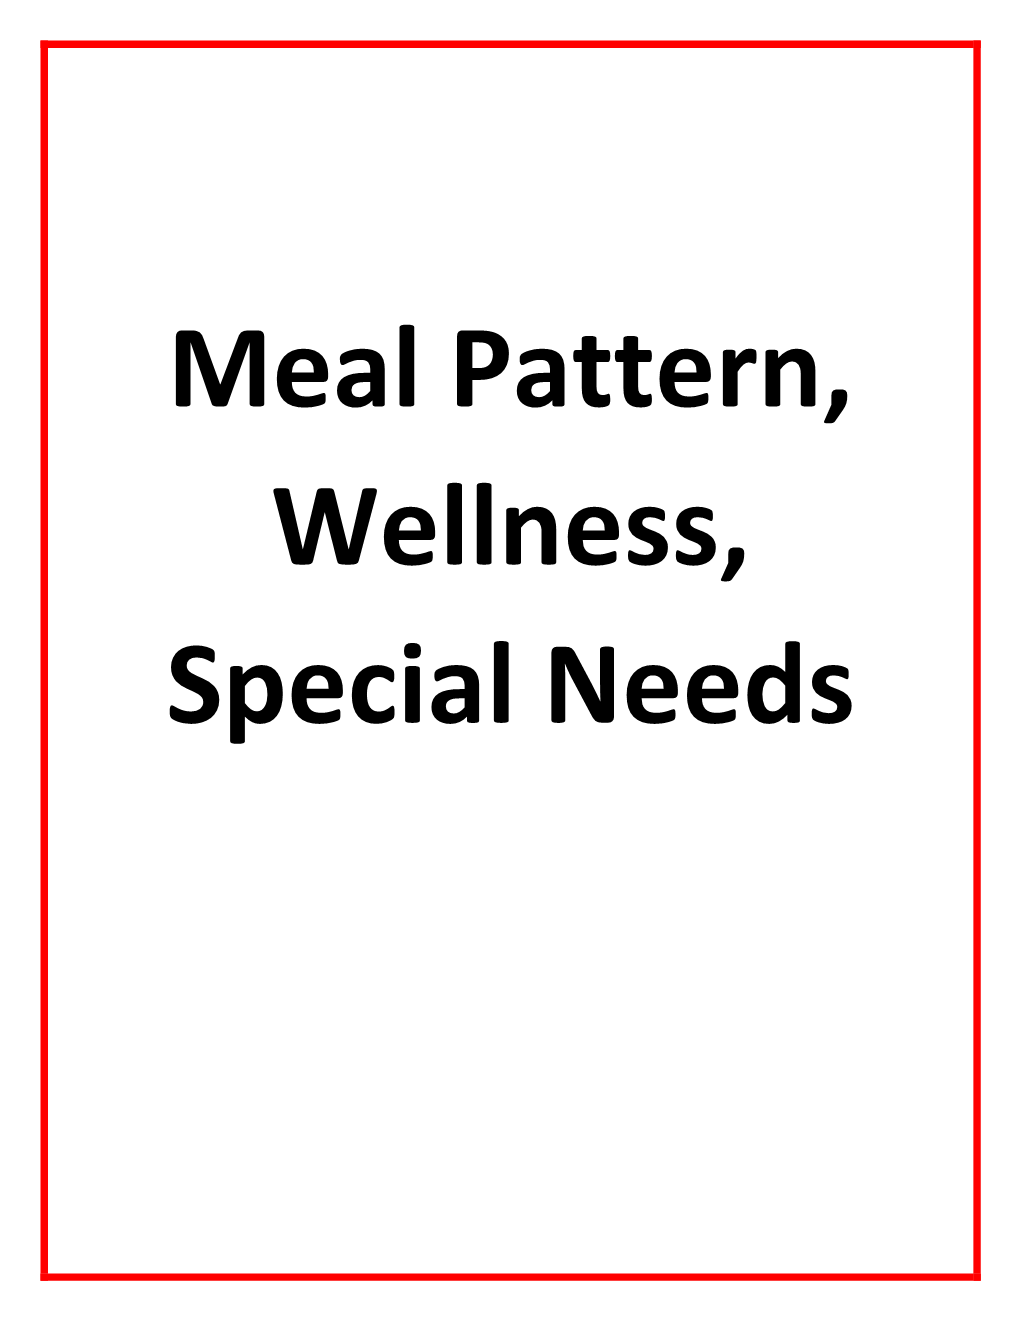 Meal Pattern, Wellness, Special Needs Meal Production Record Evaluation Tool (Part C)